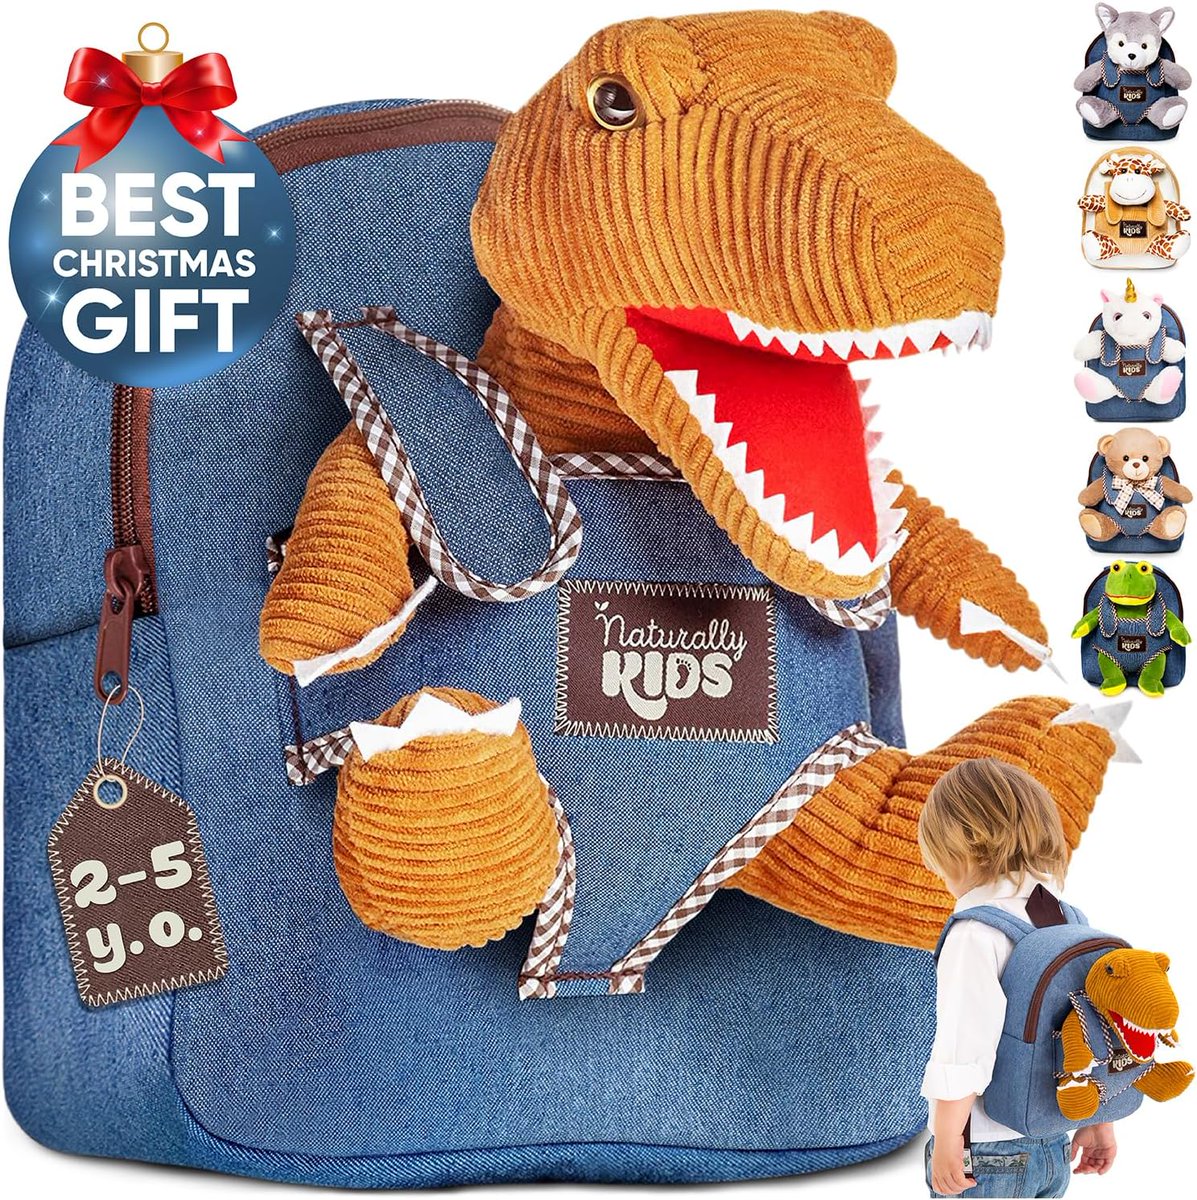 🦖 Make their day ROAR-some with our T-Rex Dinosaur Gift! 🎁 Perfect for 2-8-year-old boys and girls, this cute dino plush is not just a toy. 🦕 Unleash the prehistoric fun! 🌟 #DinosaurGift #ToddlerToys #GiftIdeas #ad

Order here: amzn.to/3RudTpU